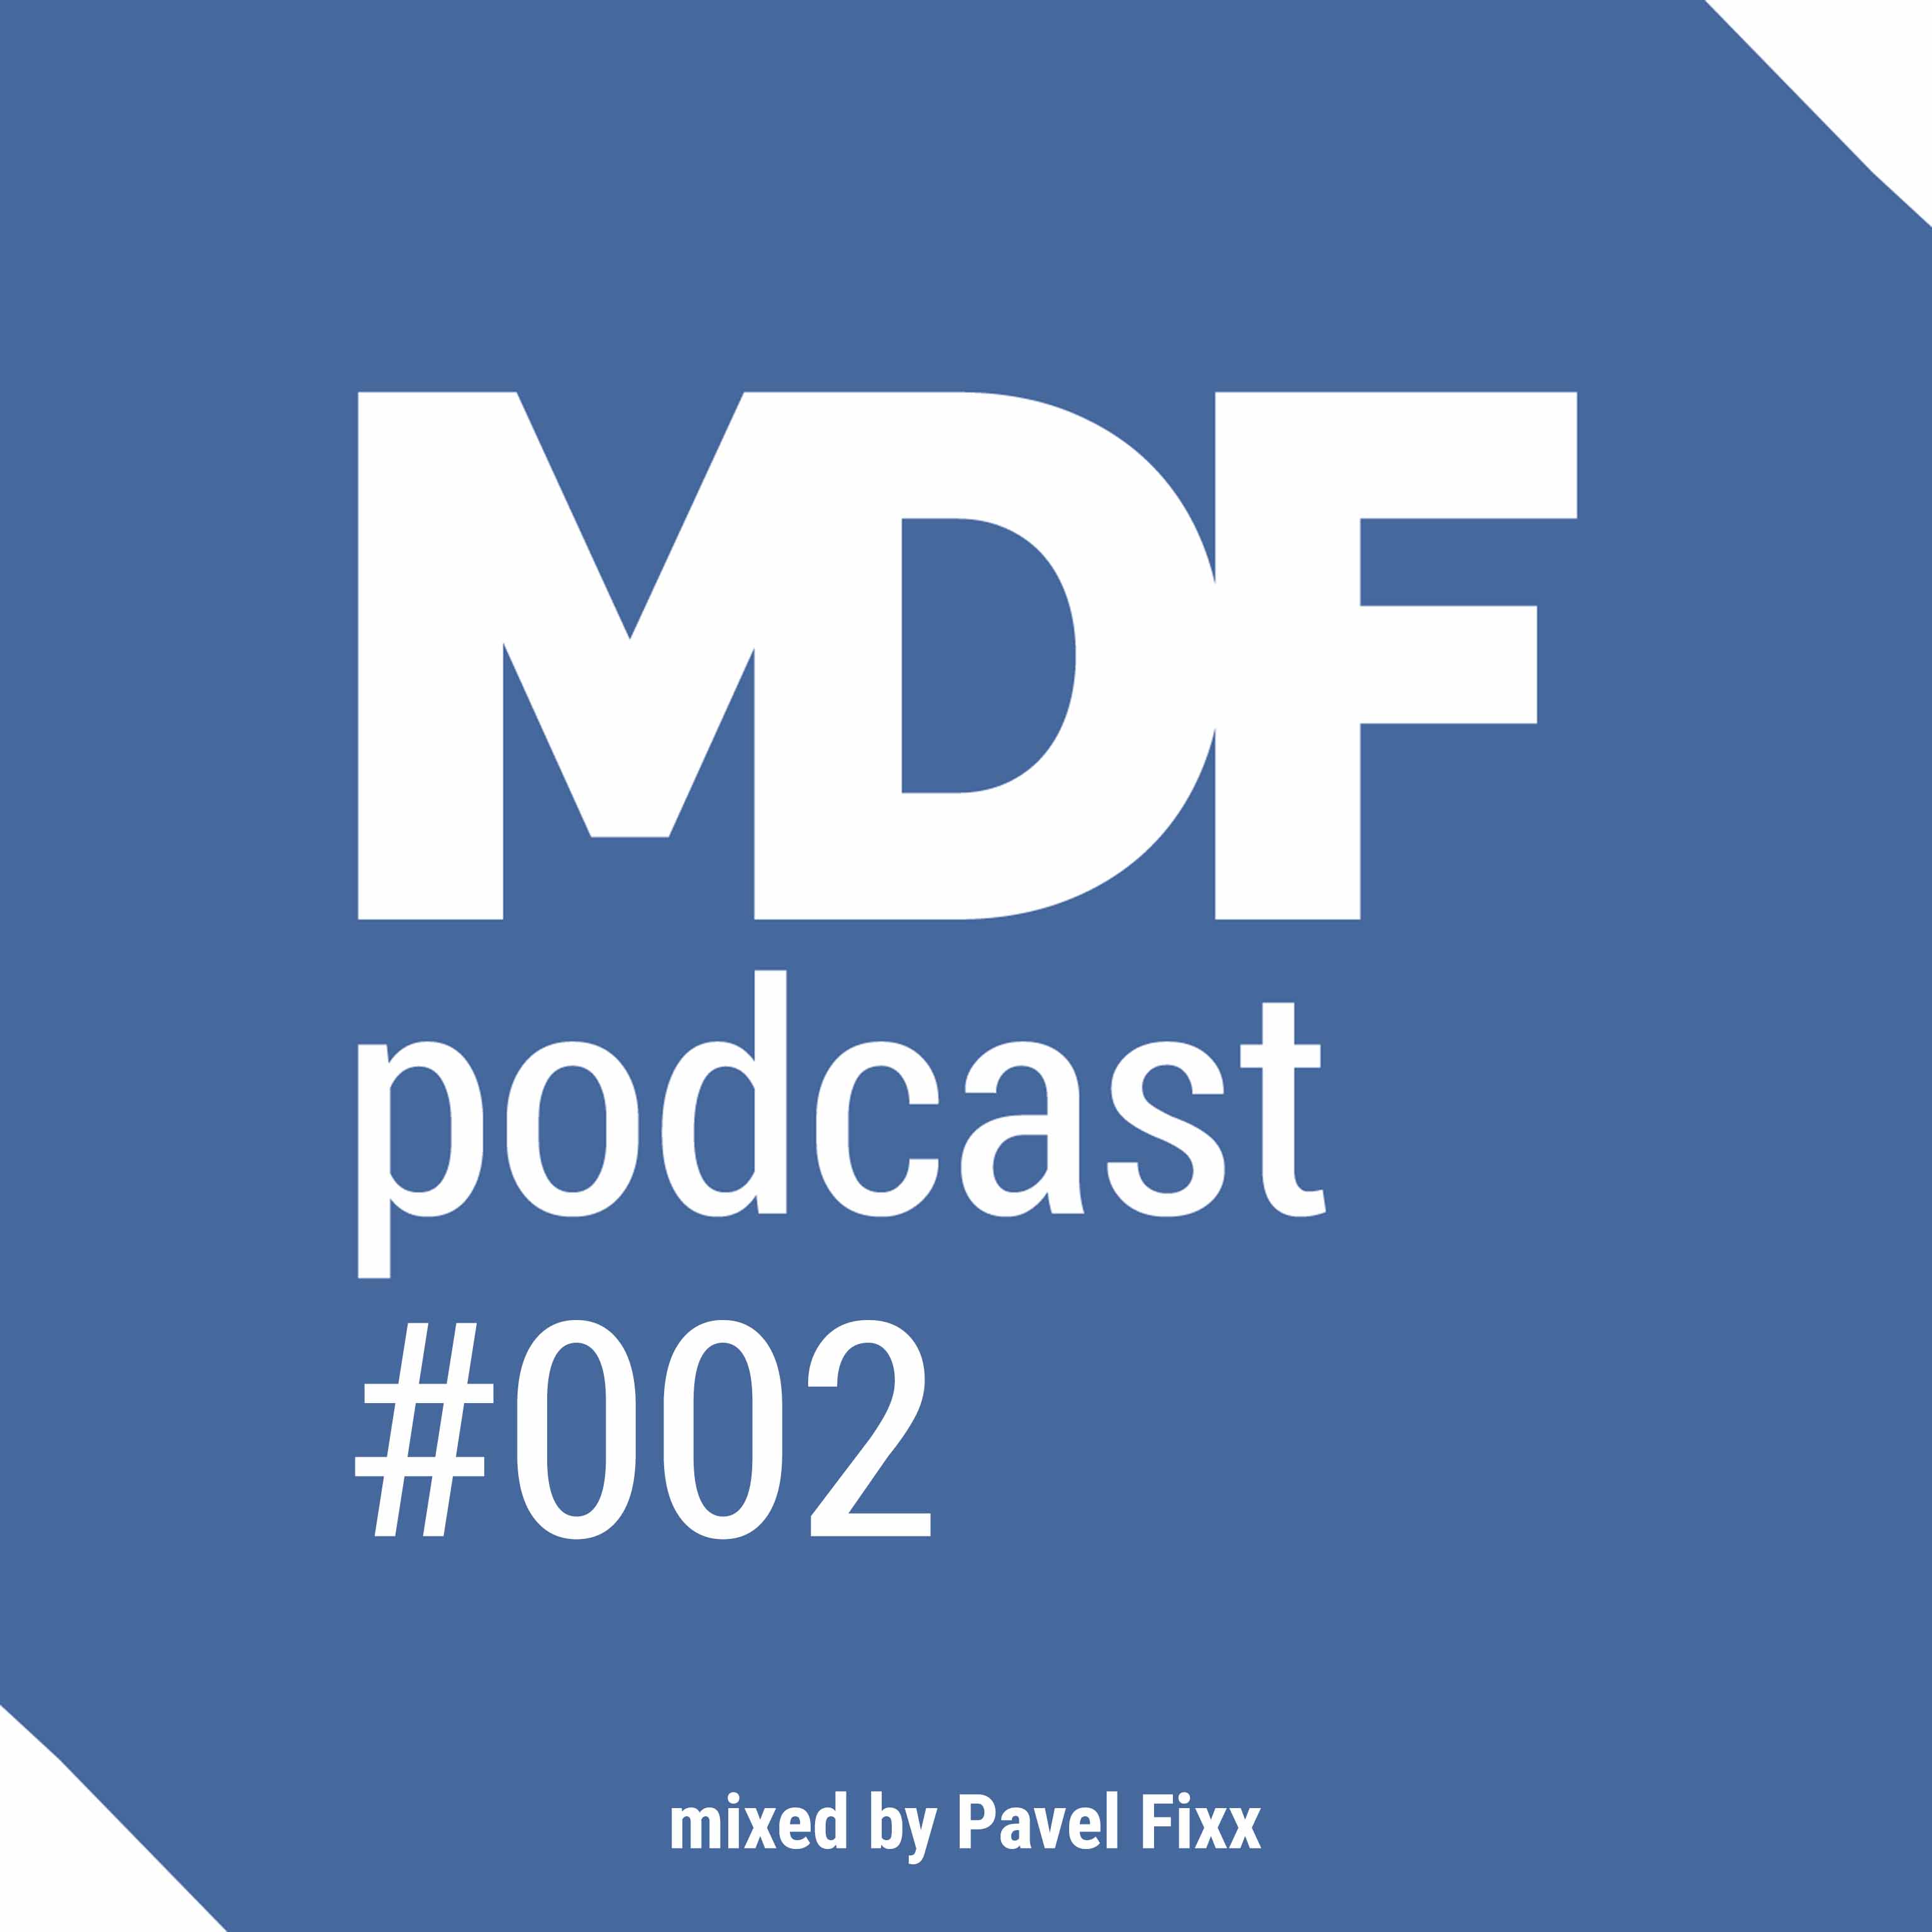 MDF Podcast oo2